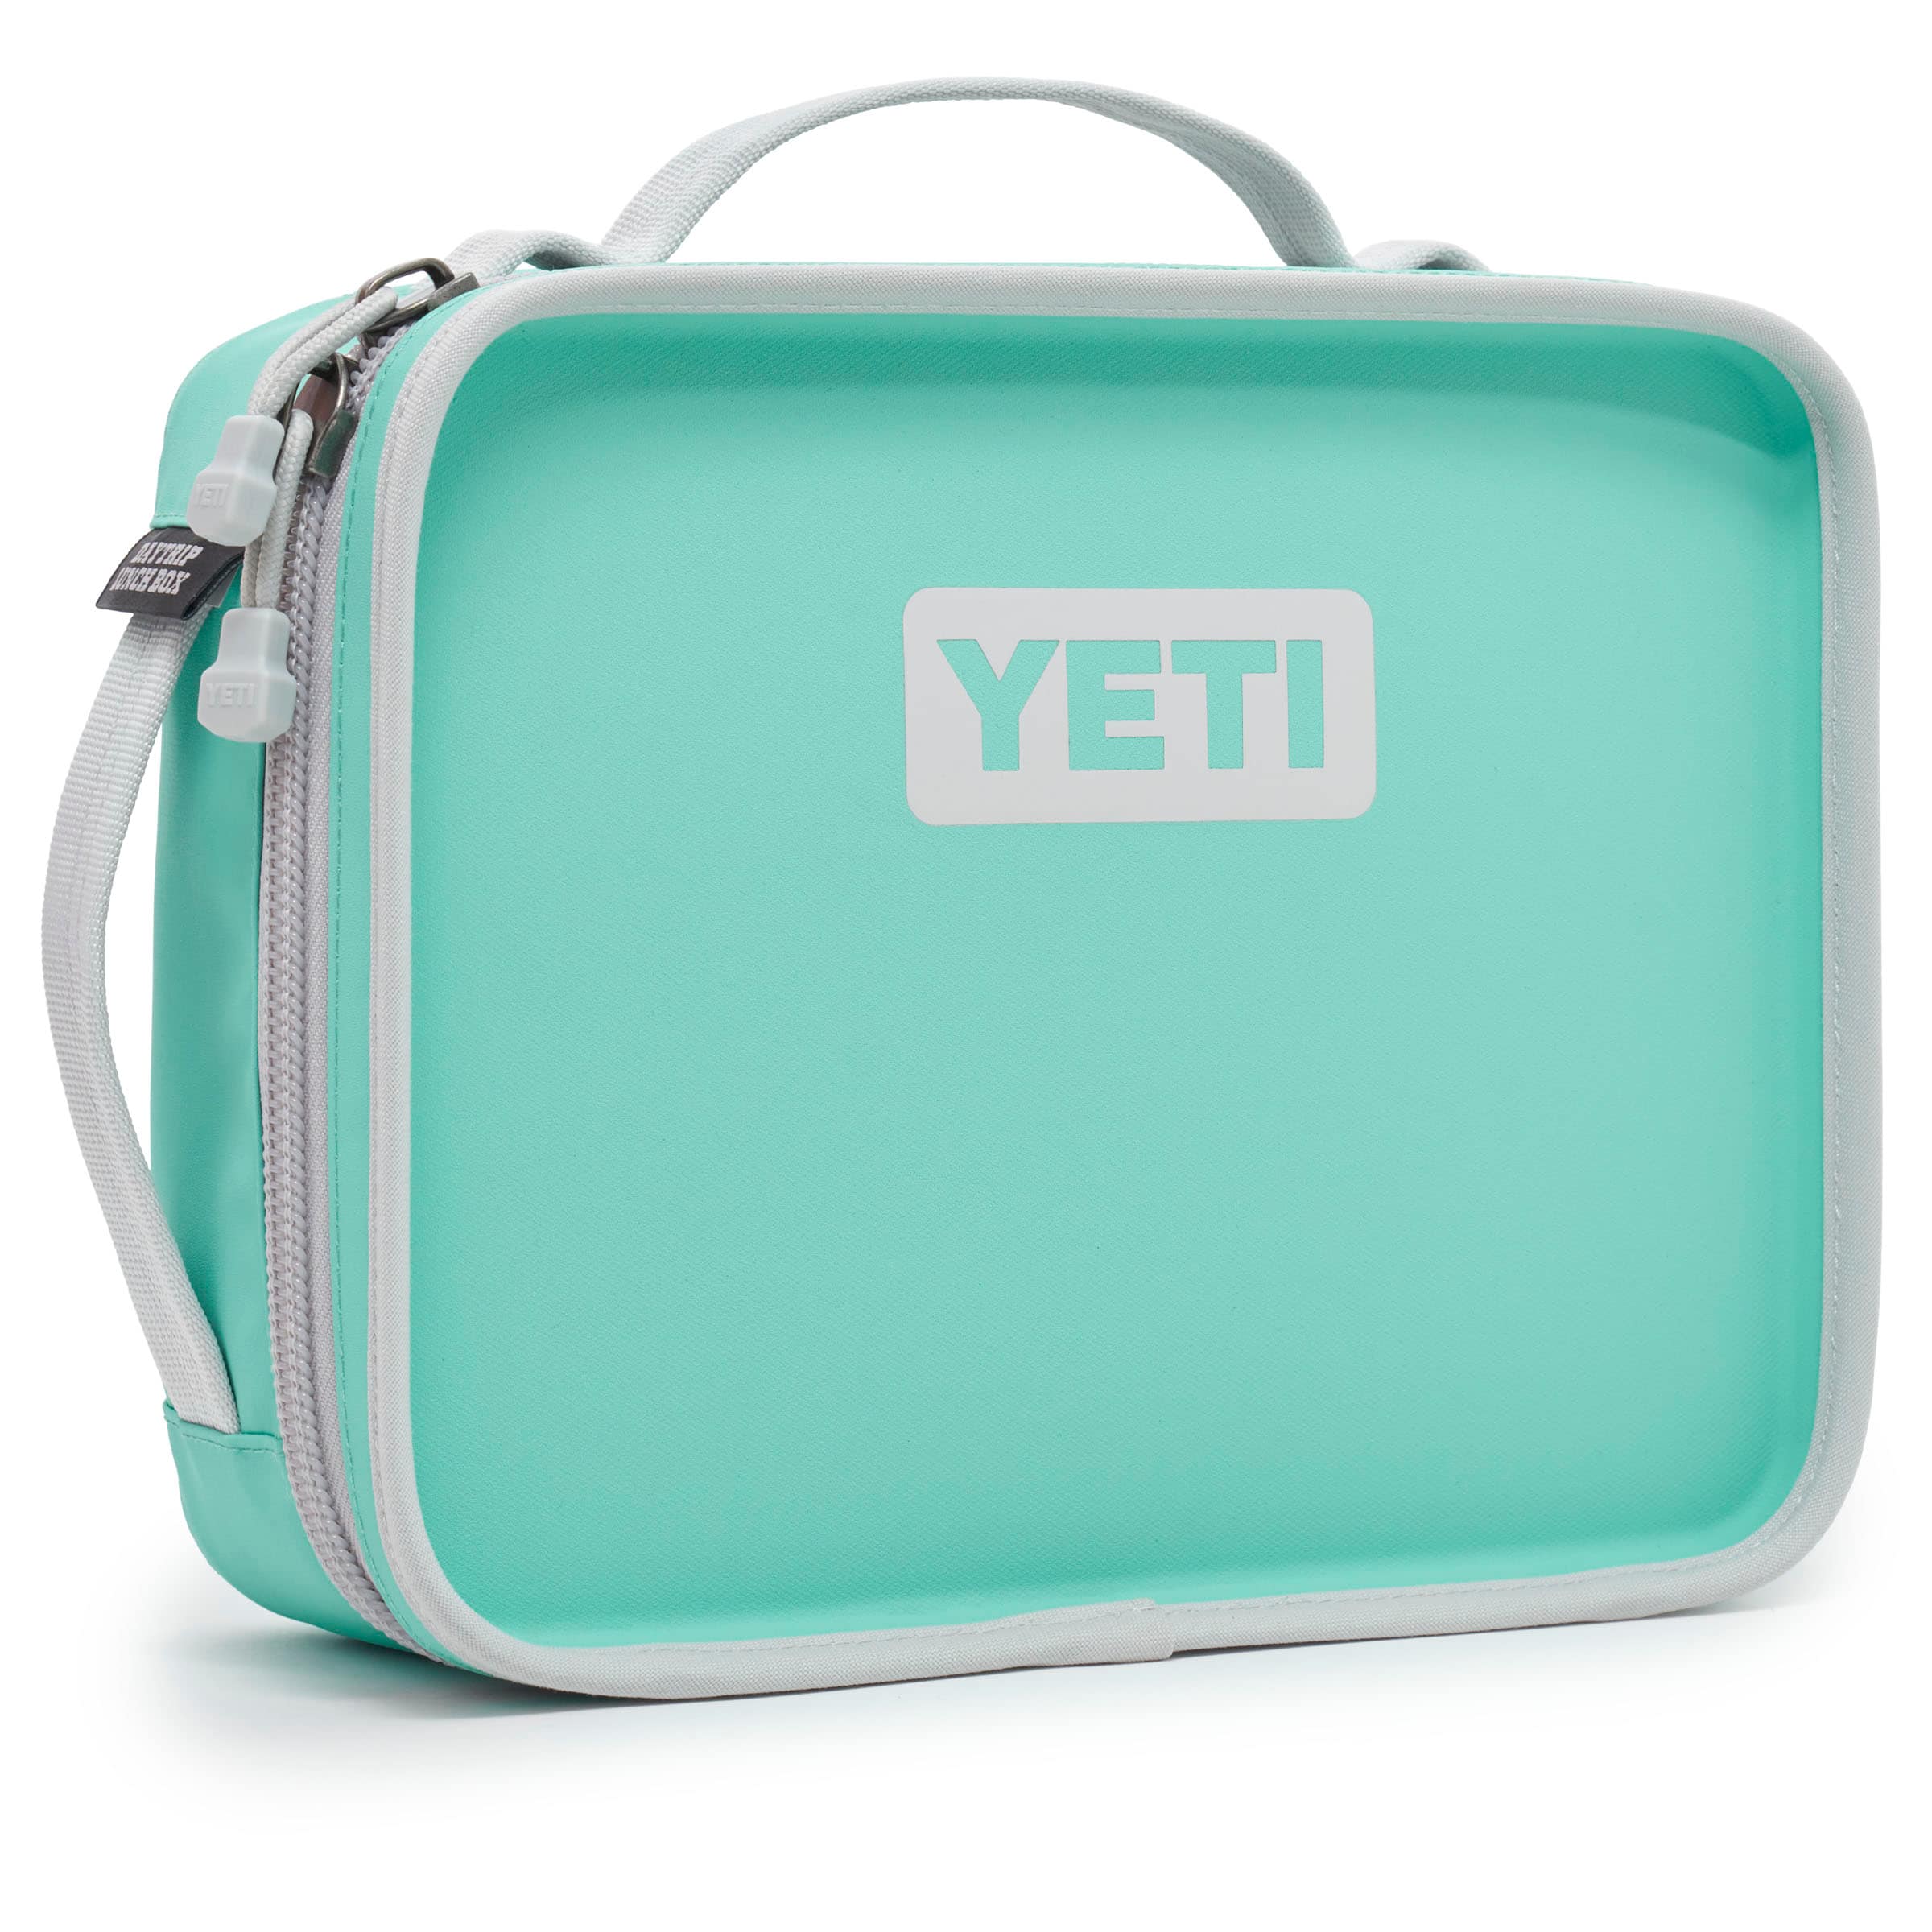 YETI Daytrip Lunch Box, Aquifer Blue in the Portable Coolers